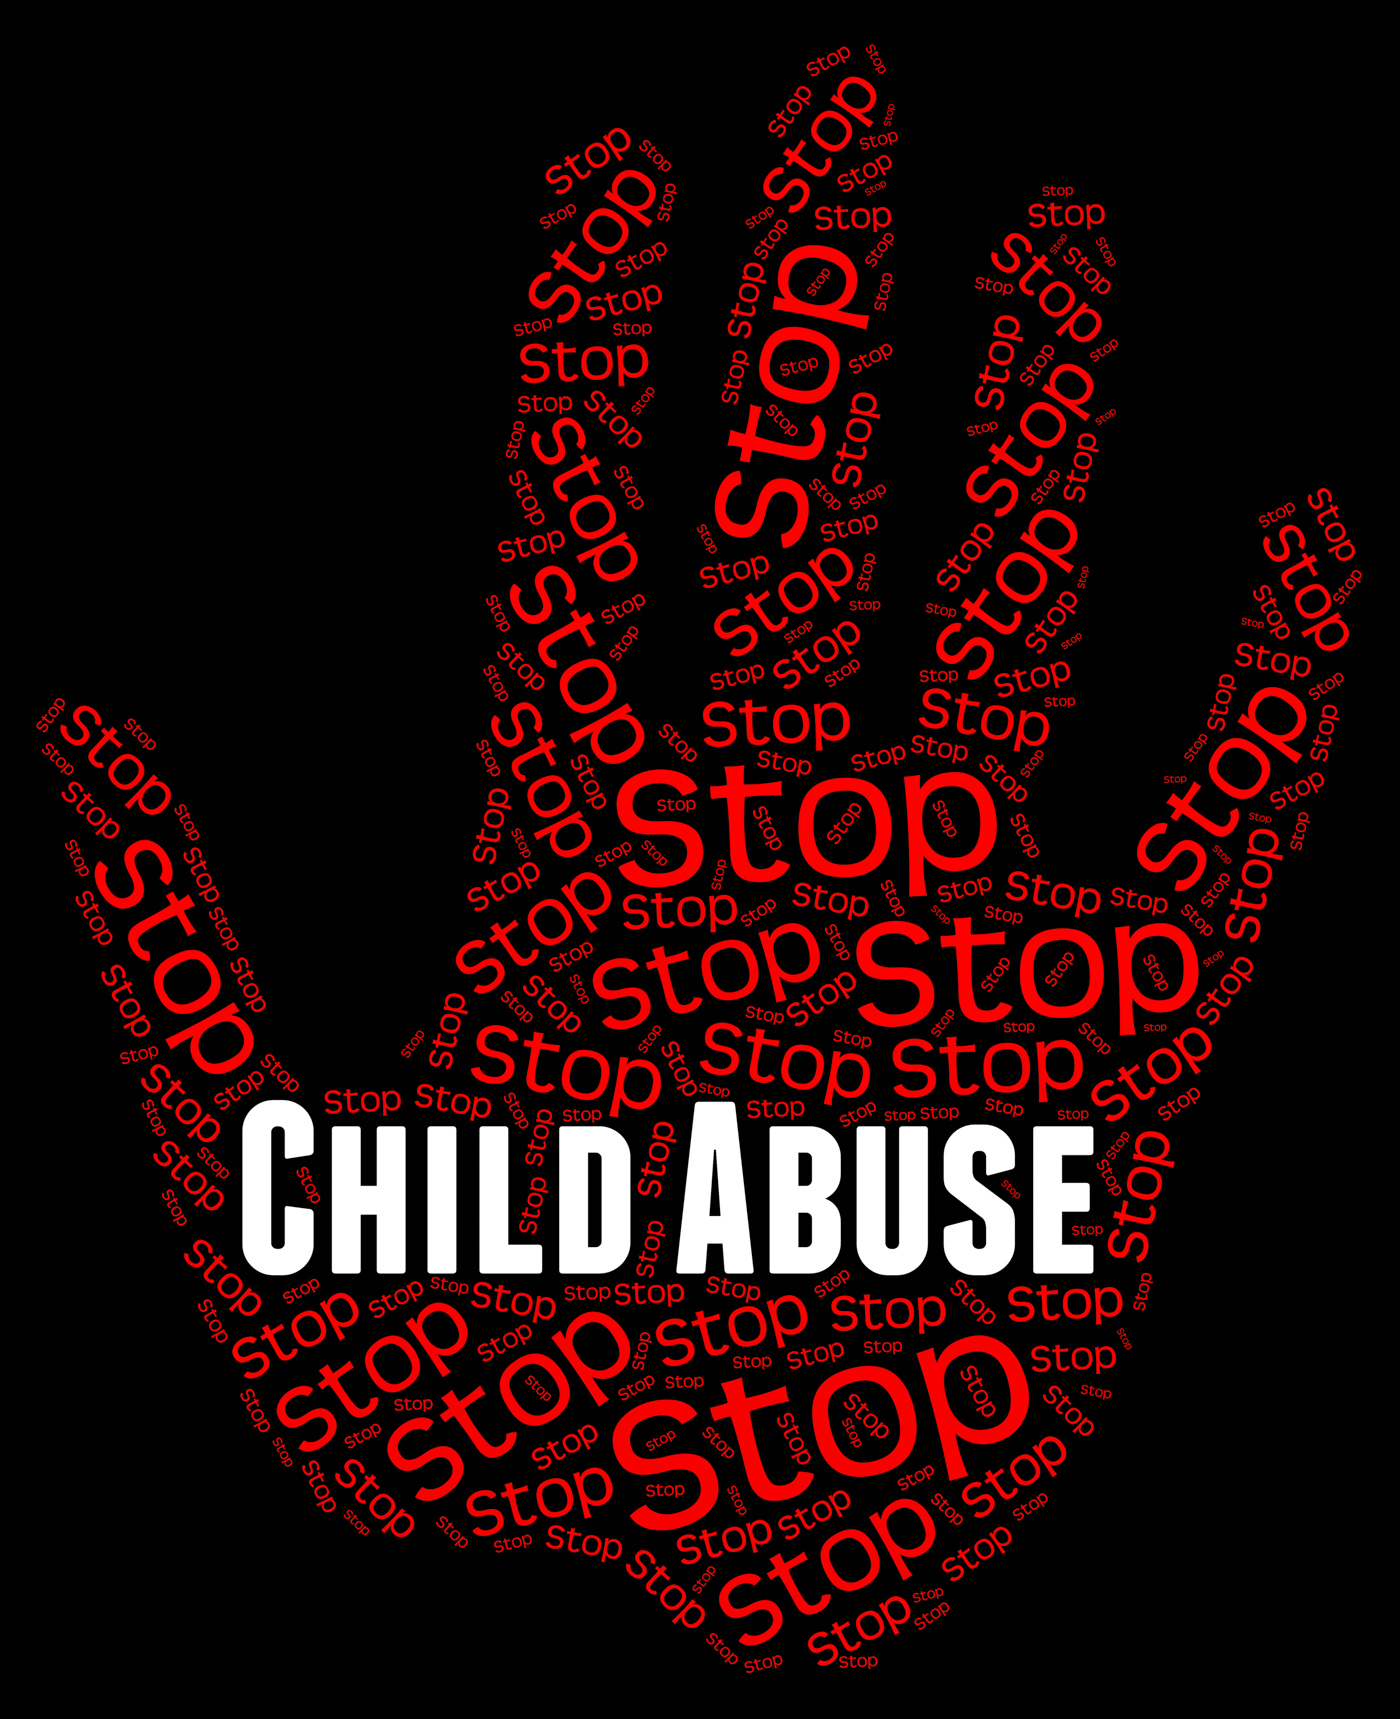 Stop child abuse represents no childhood and mistreat photo